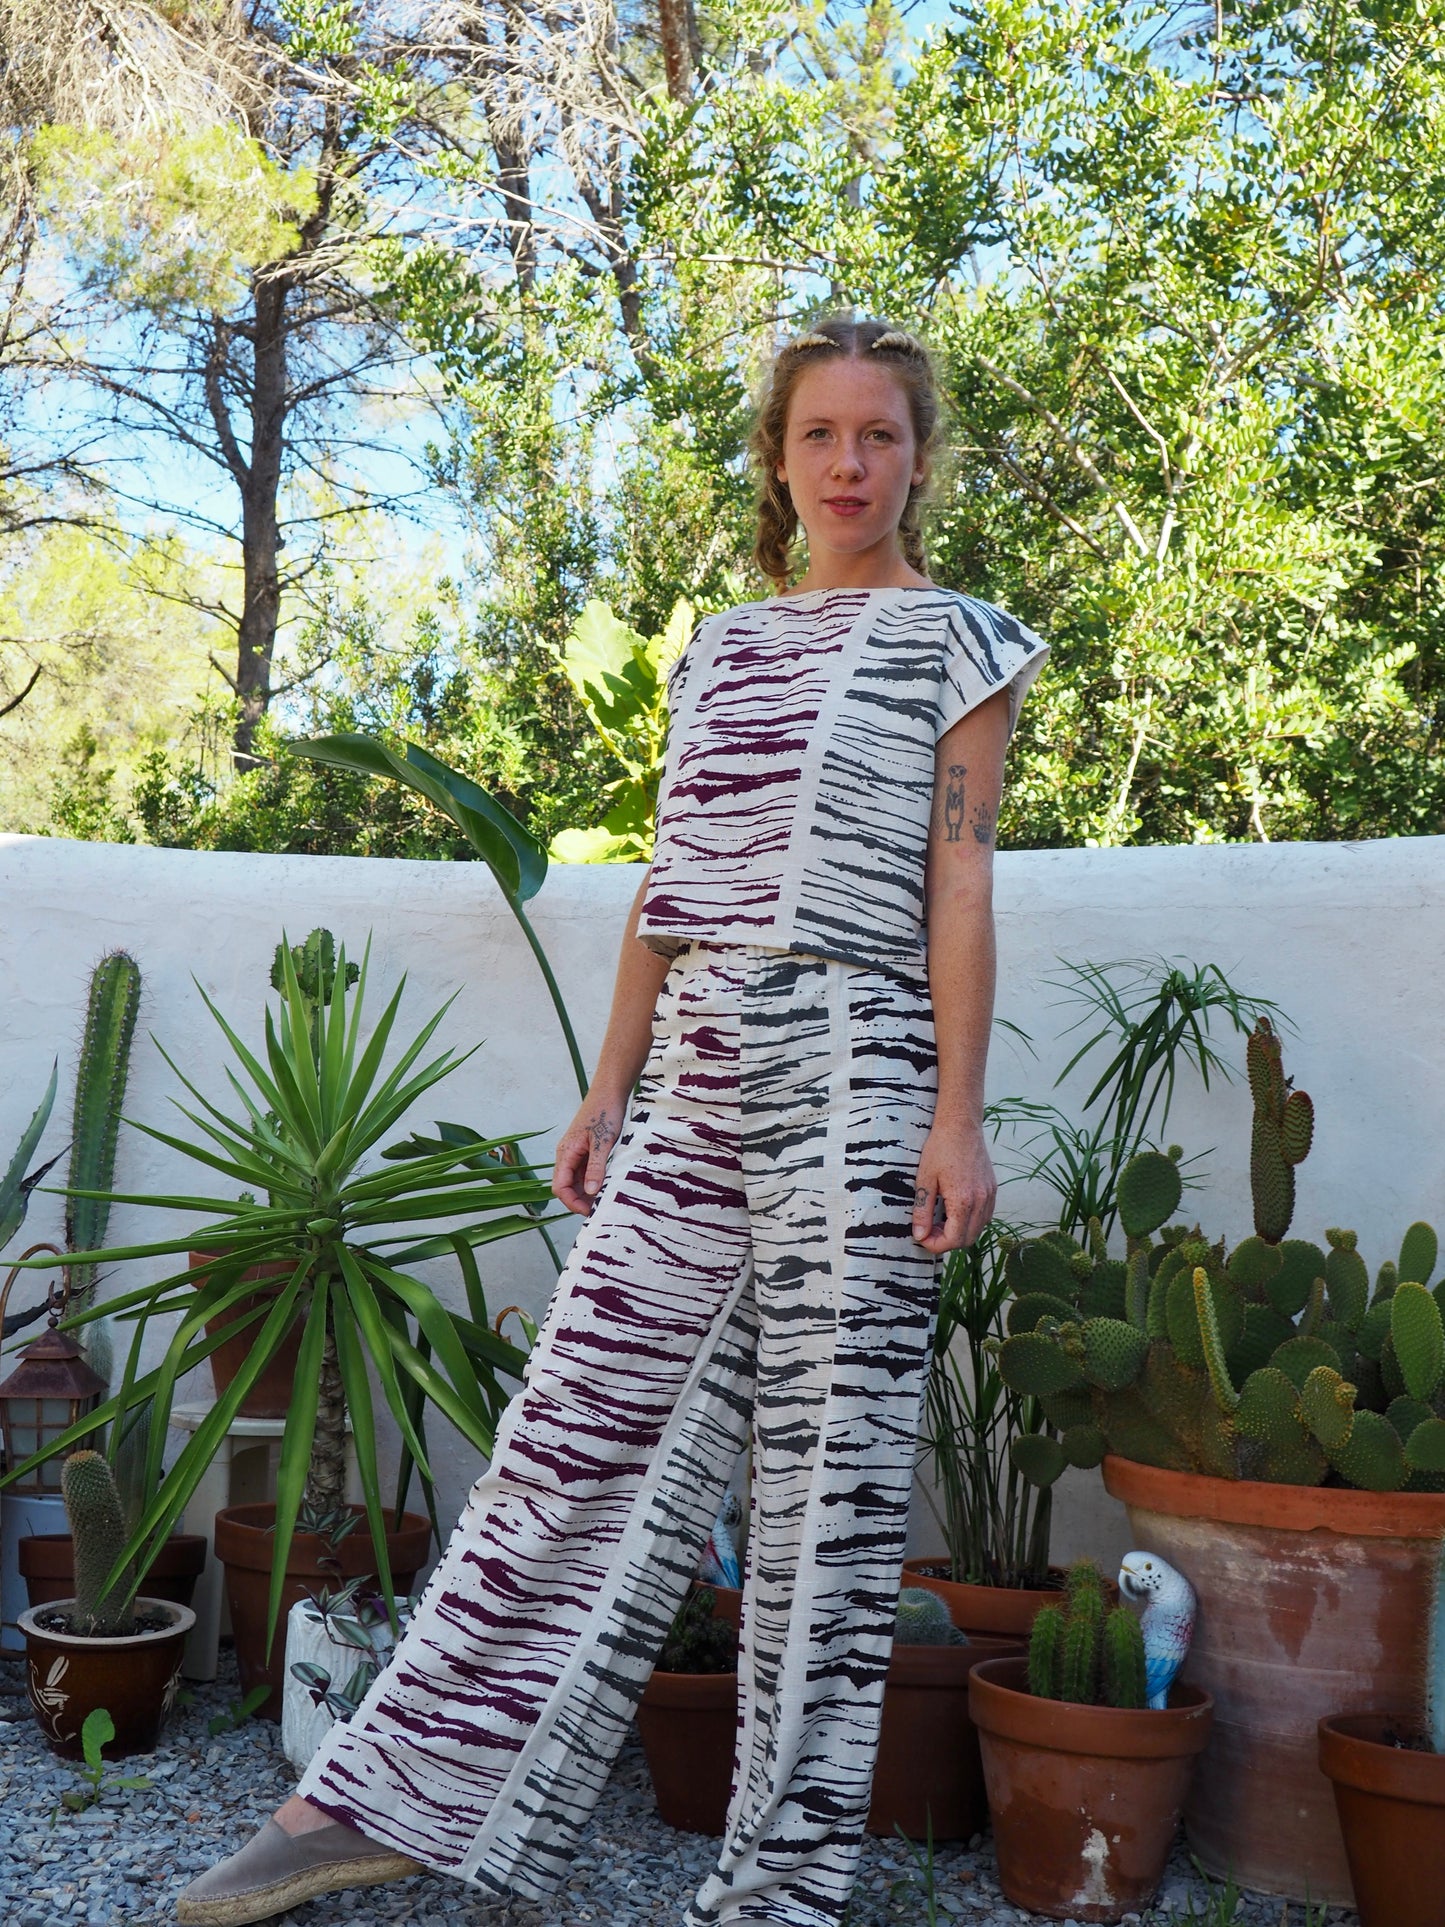 Super nice linen fabric with abstract print up-cycled wide leg pants made by Vagabond Ibiza